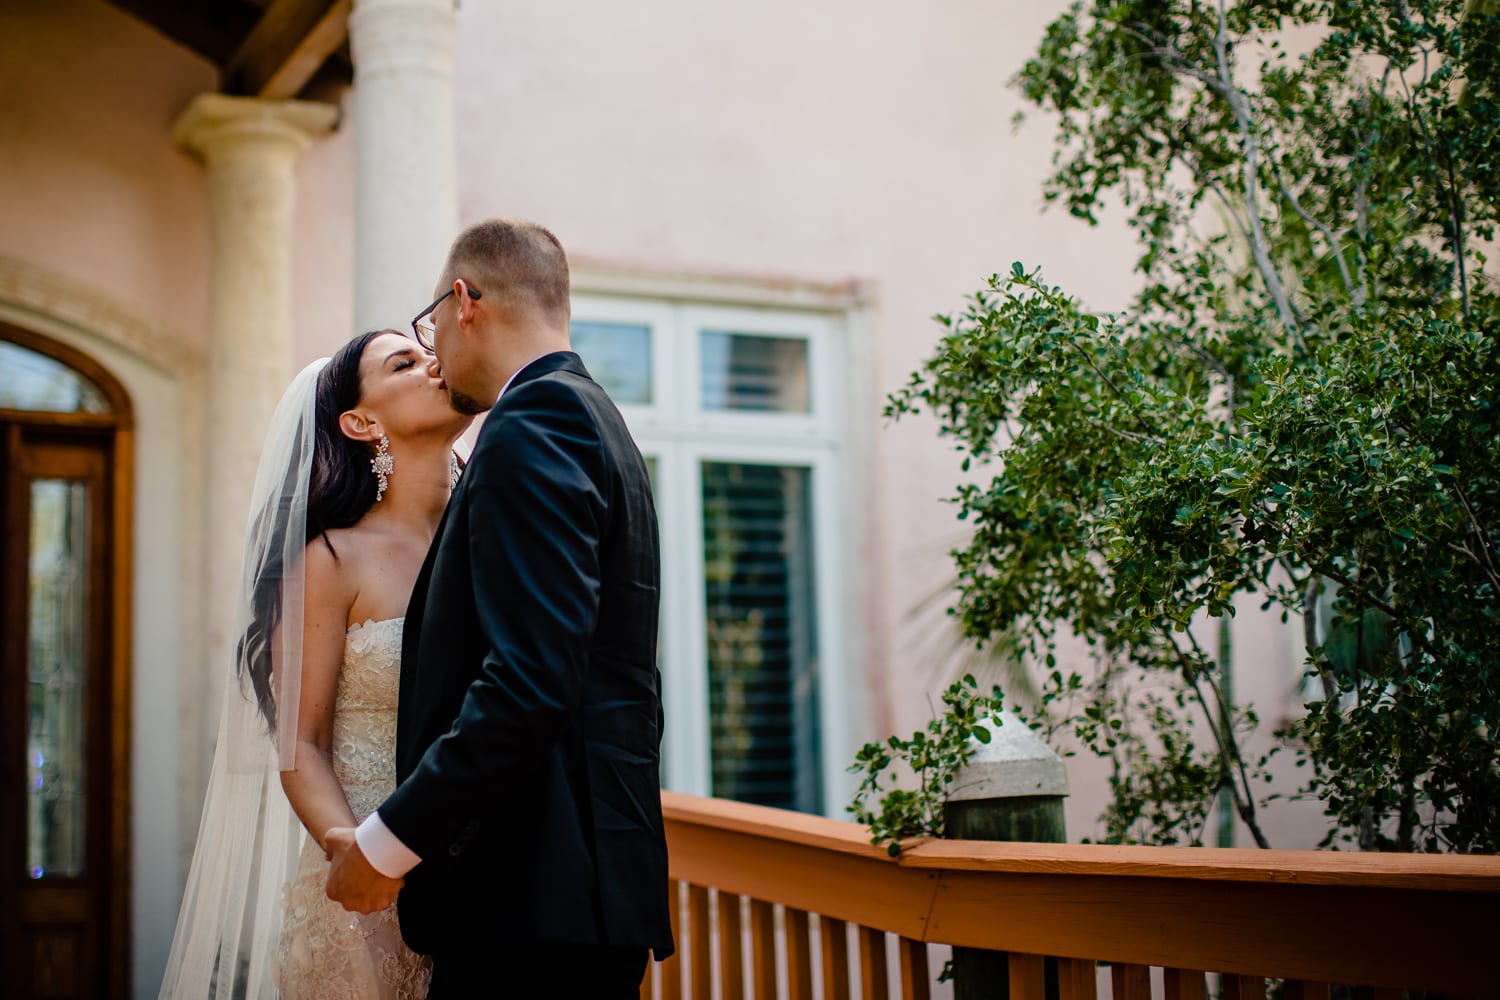 A Hemingway-inspired couple embraces on the porch of their home on their wedding day.